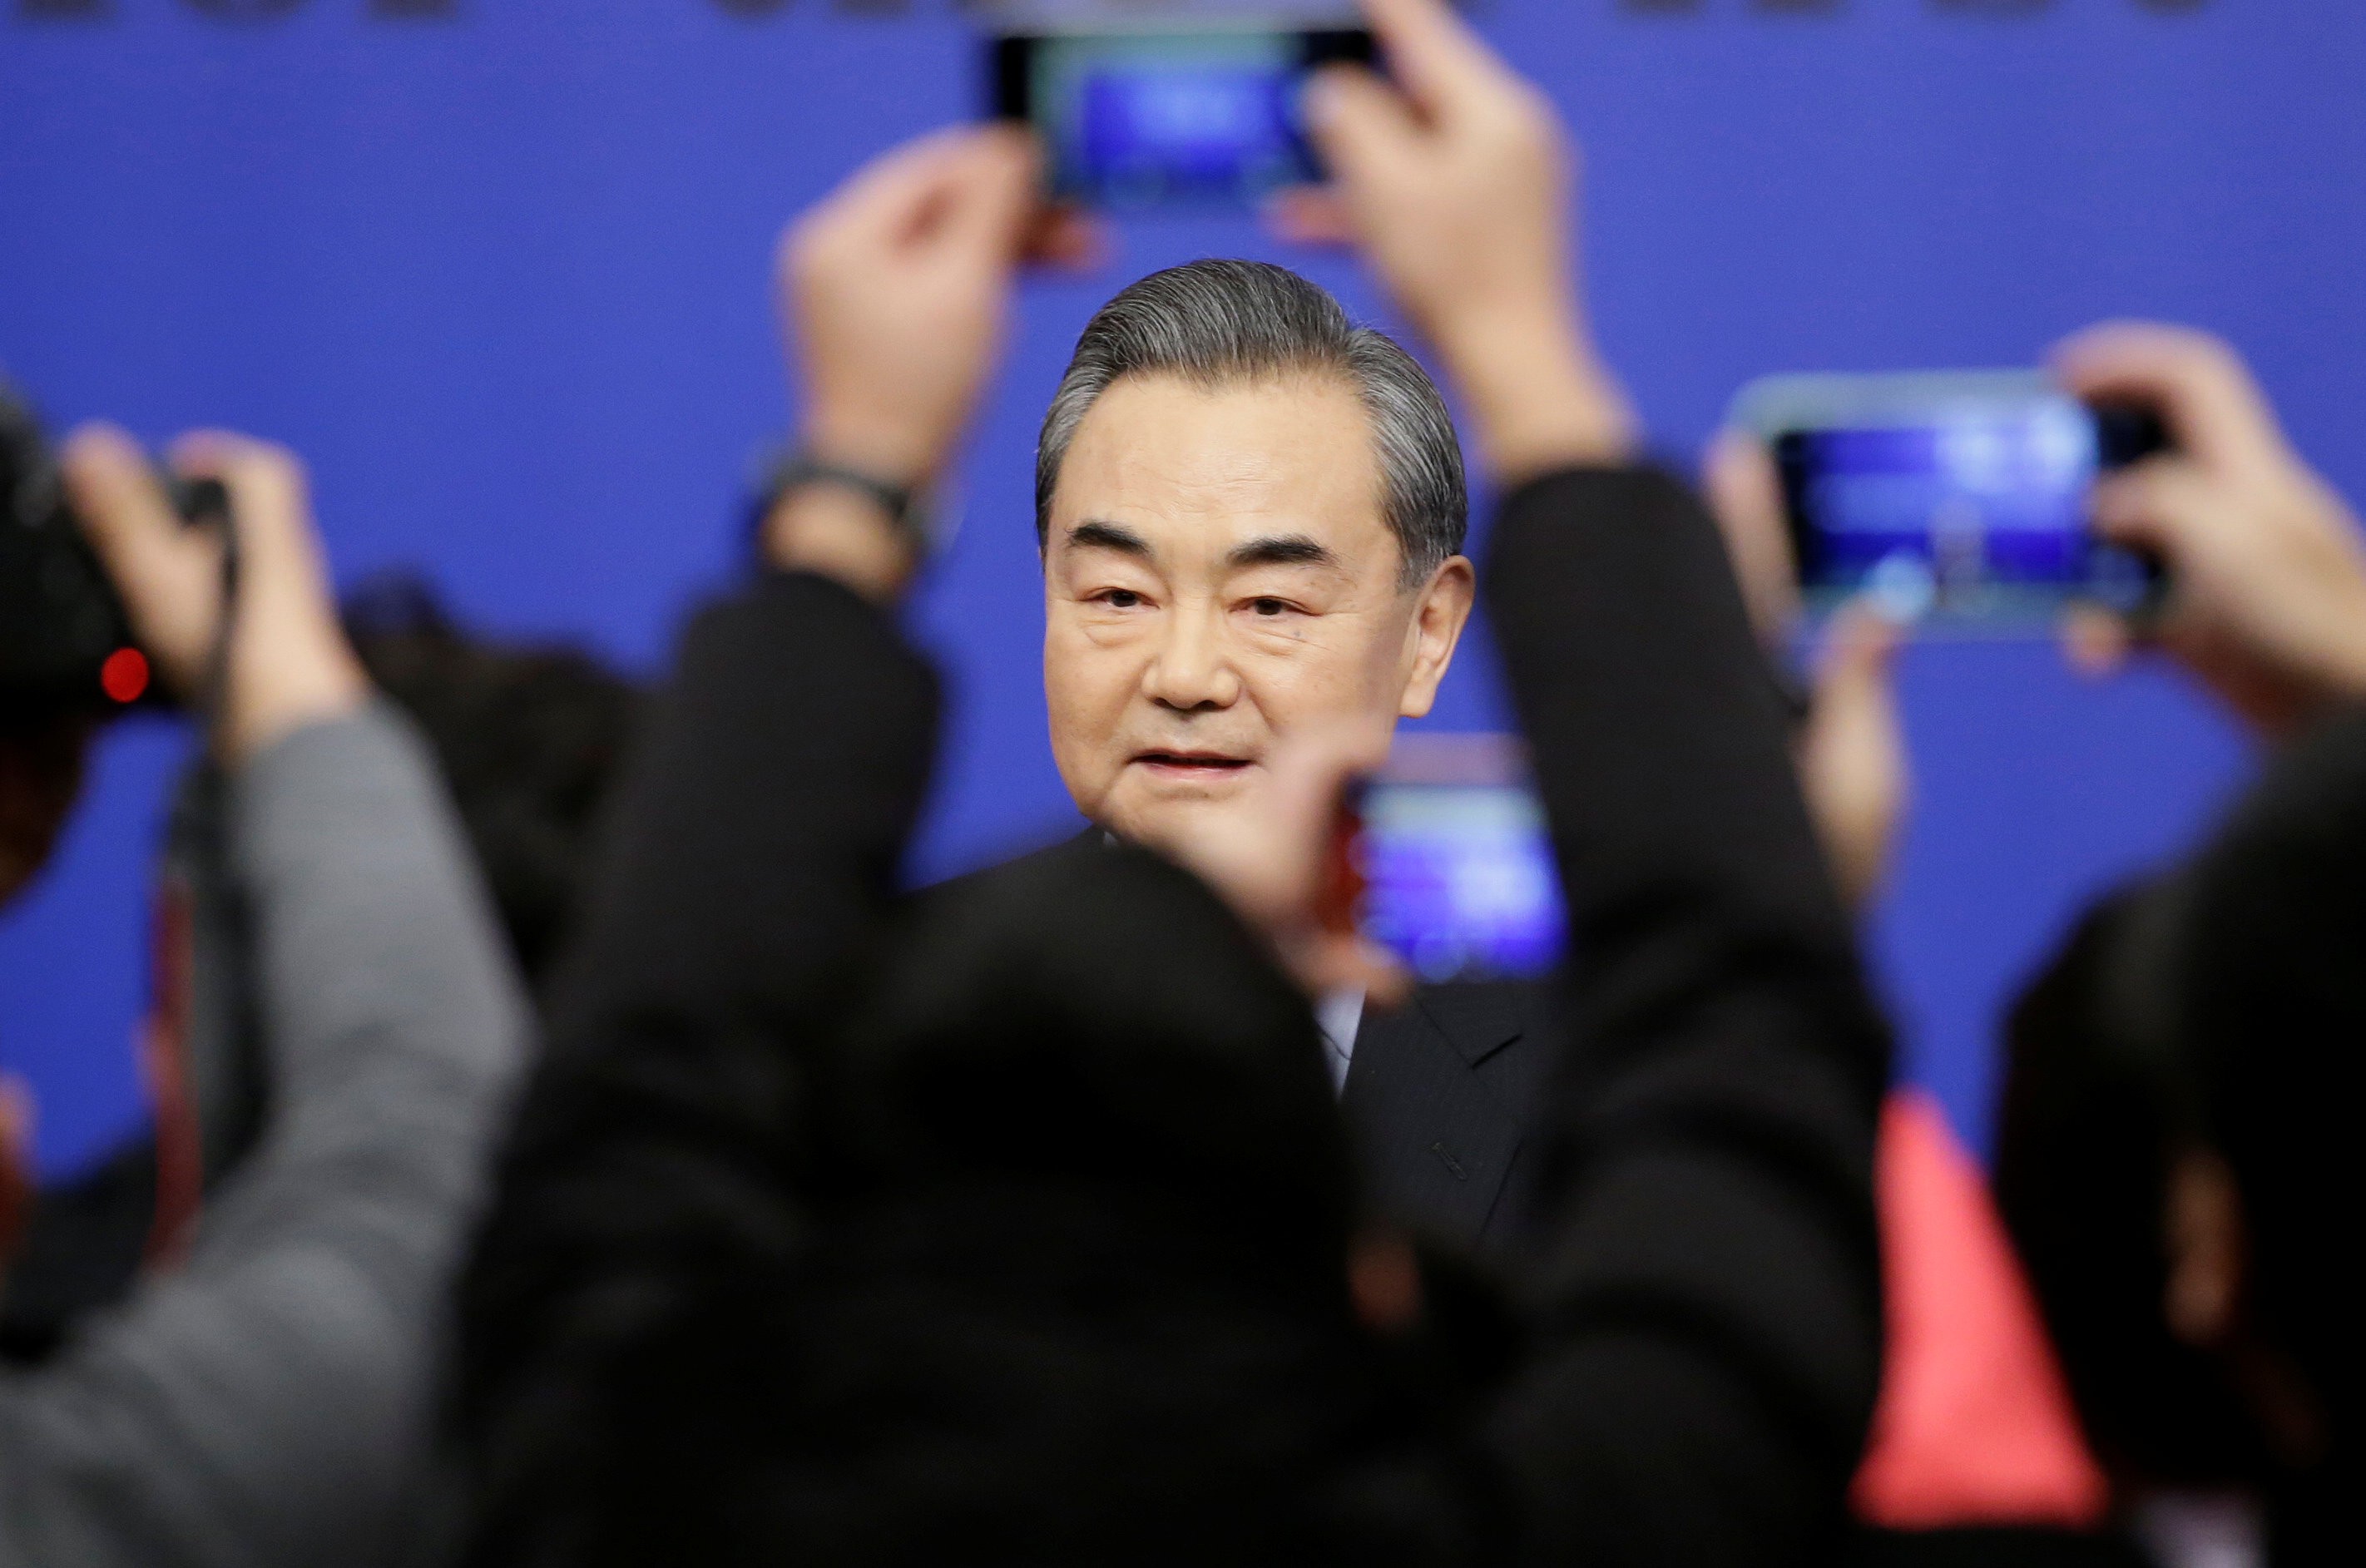 Foreign Minister Wang Yi says two nations should see each other as partners not rivals, amid fears world’s two largest economies are on brink of trade war